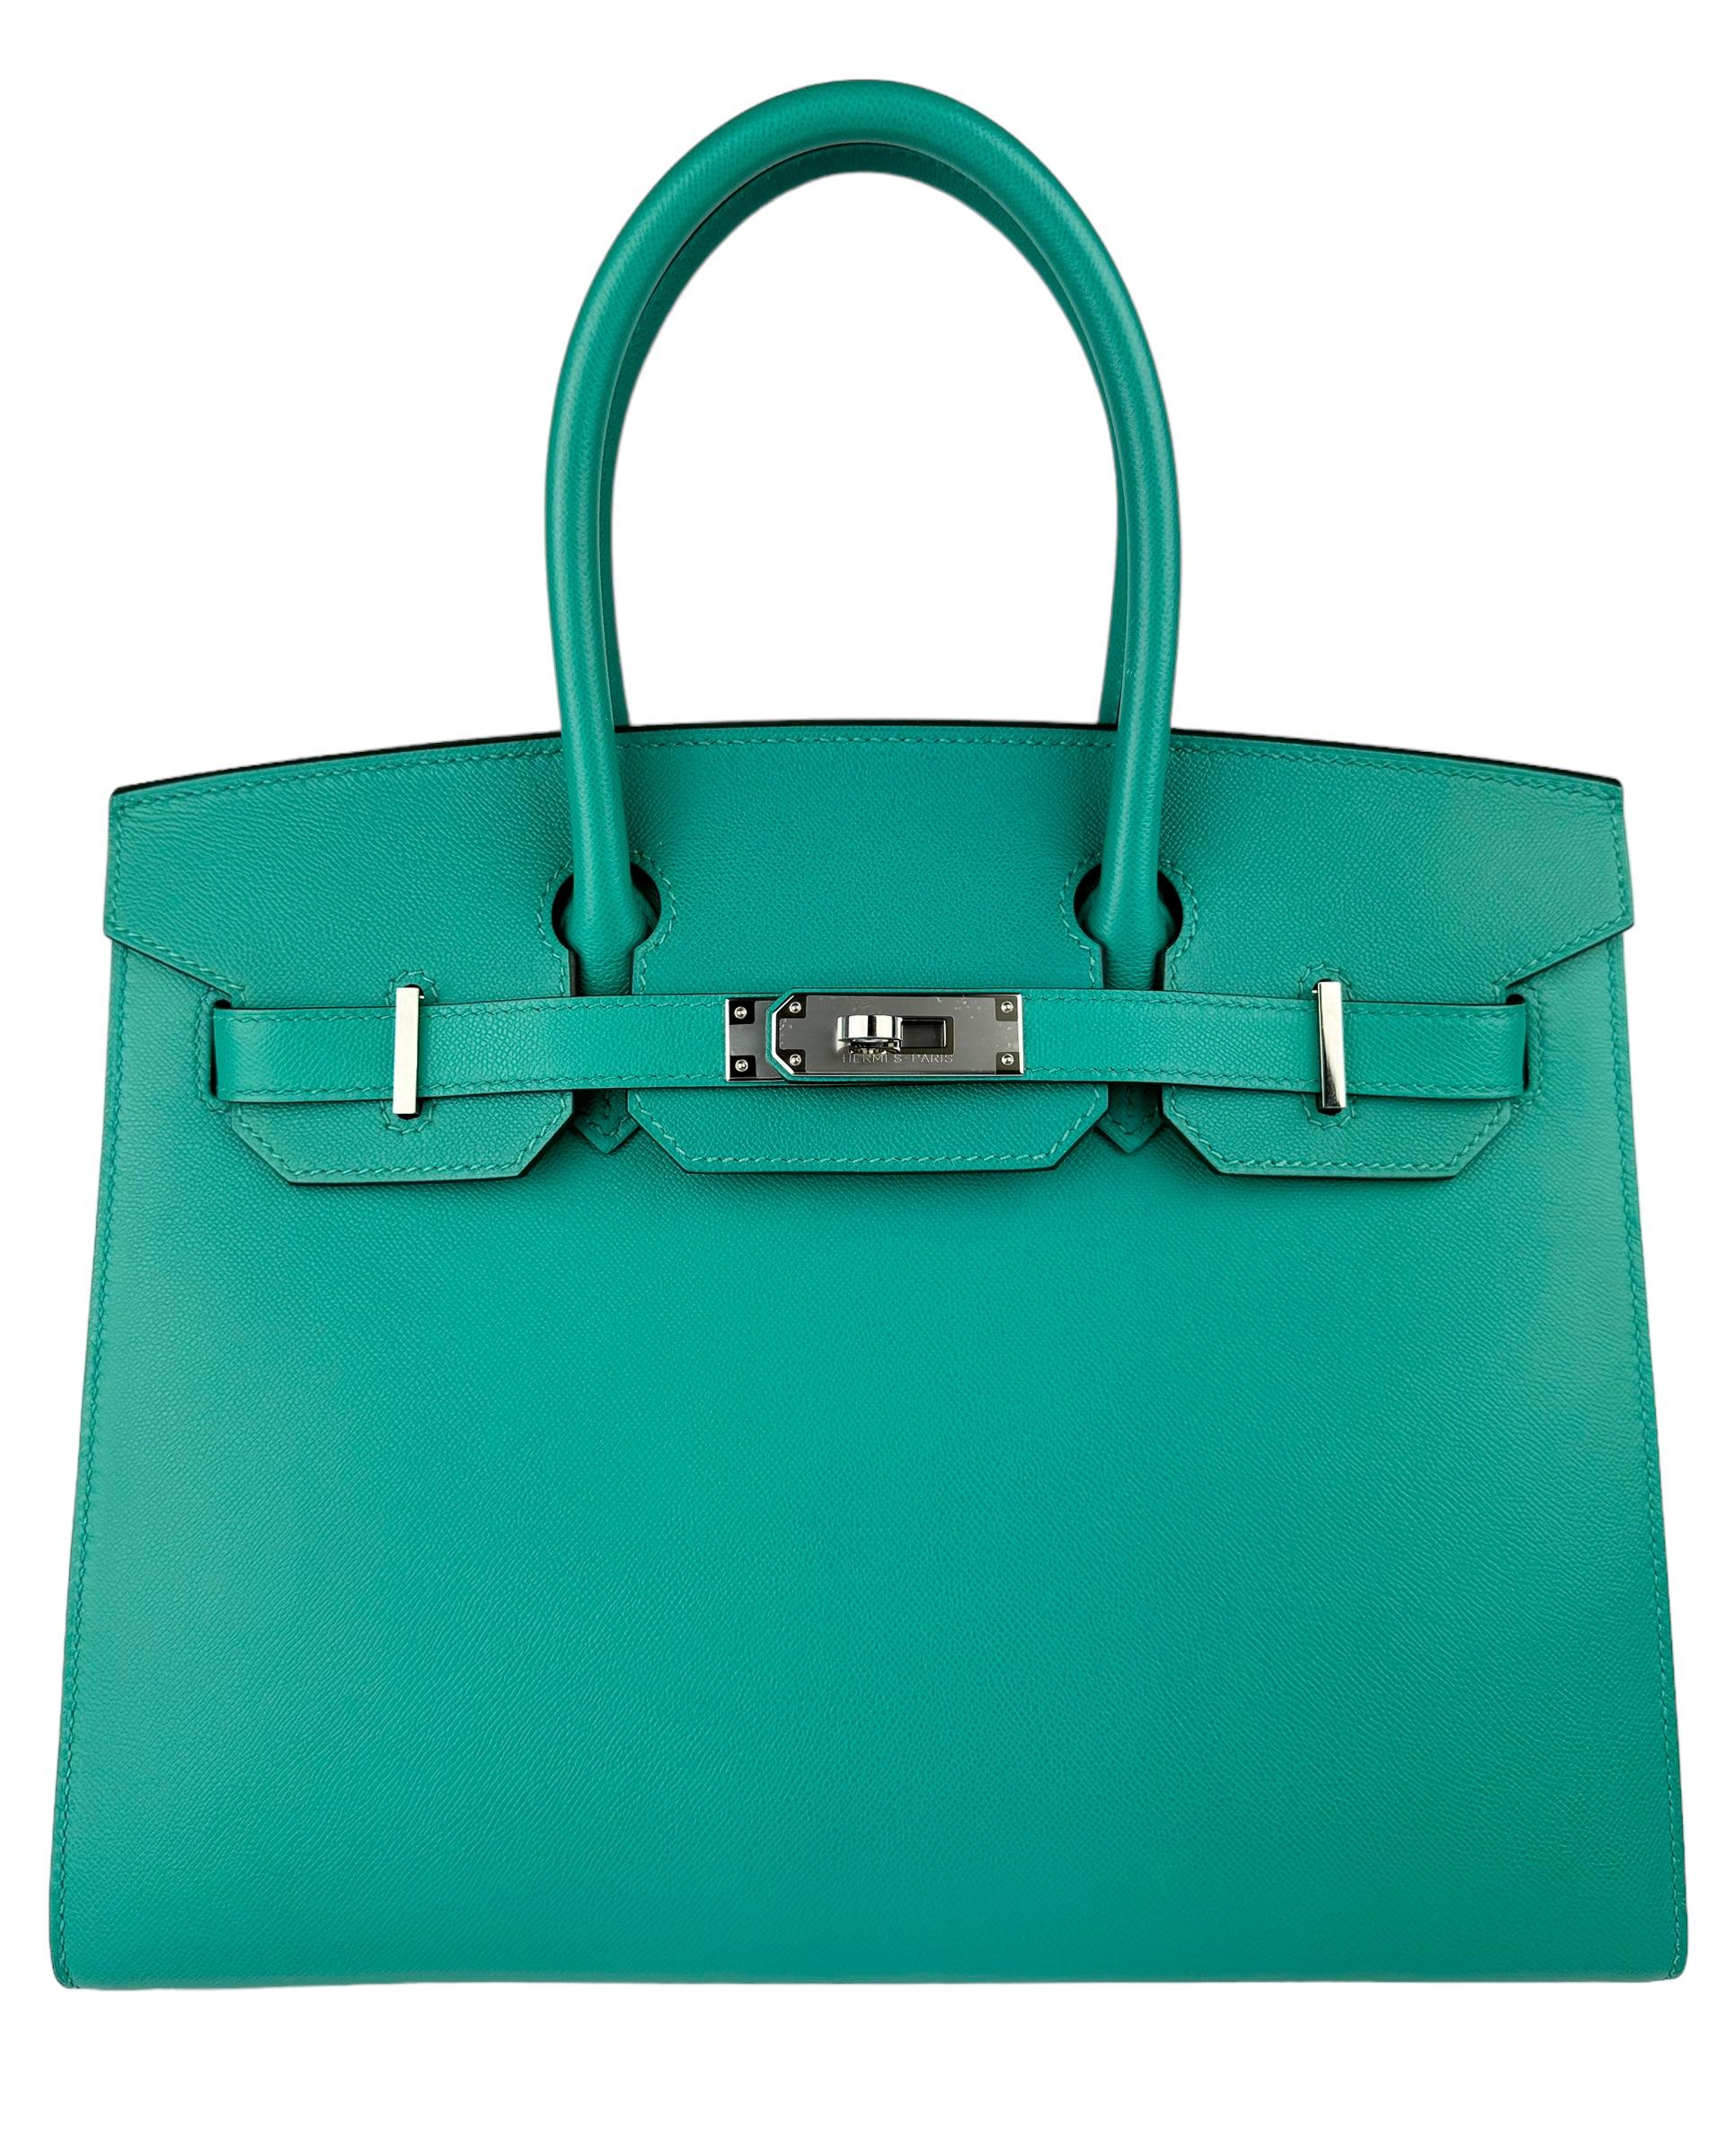 bsolutely Stunning Rare. Limited Edition Hermes Birkin 30 Sellier Vert Verone. Complimented by Madame Leather and Palladium Hardware. Excellent Pre Owned Condition Plastic on Hardware. Z Stamp 2021. 

Please keep in mind that this is a pre owned